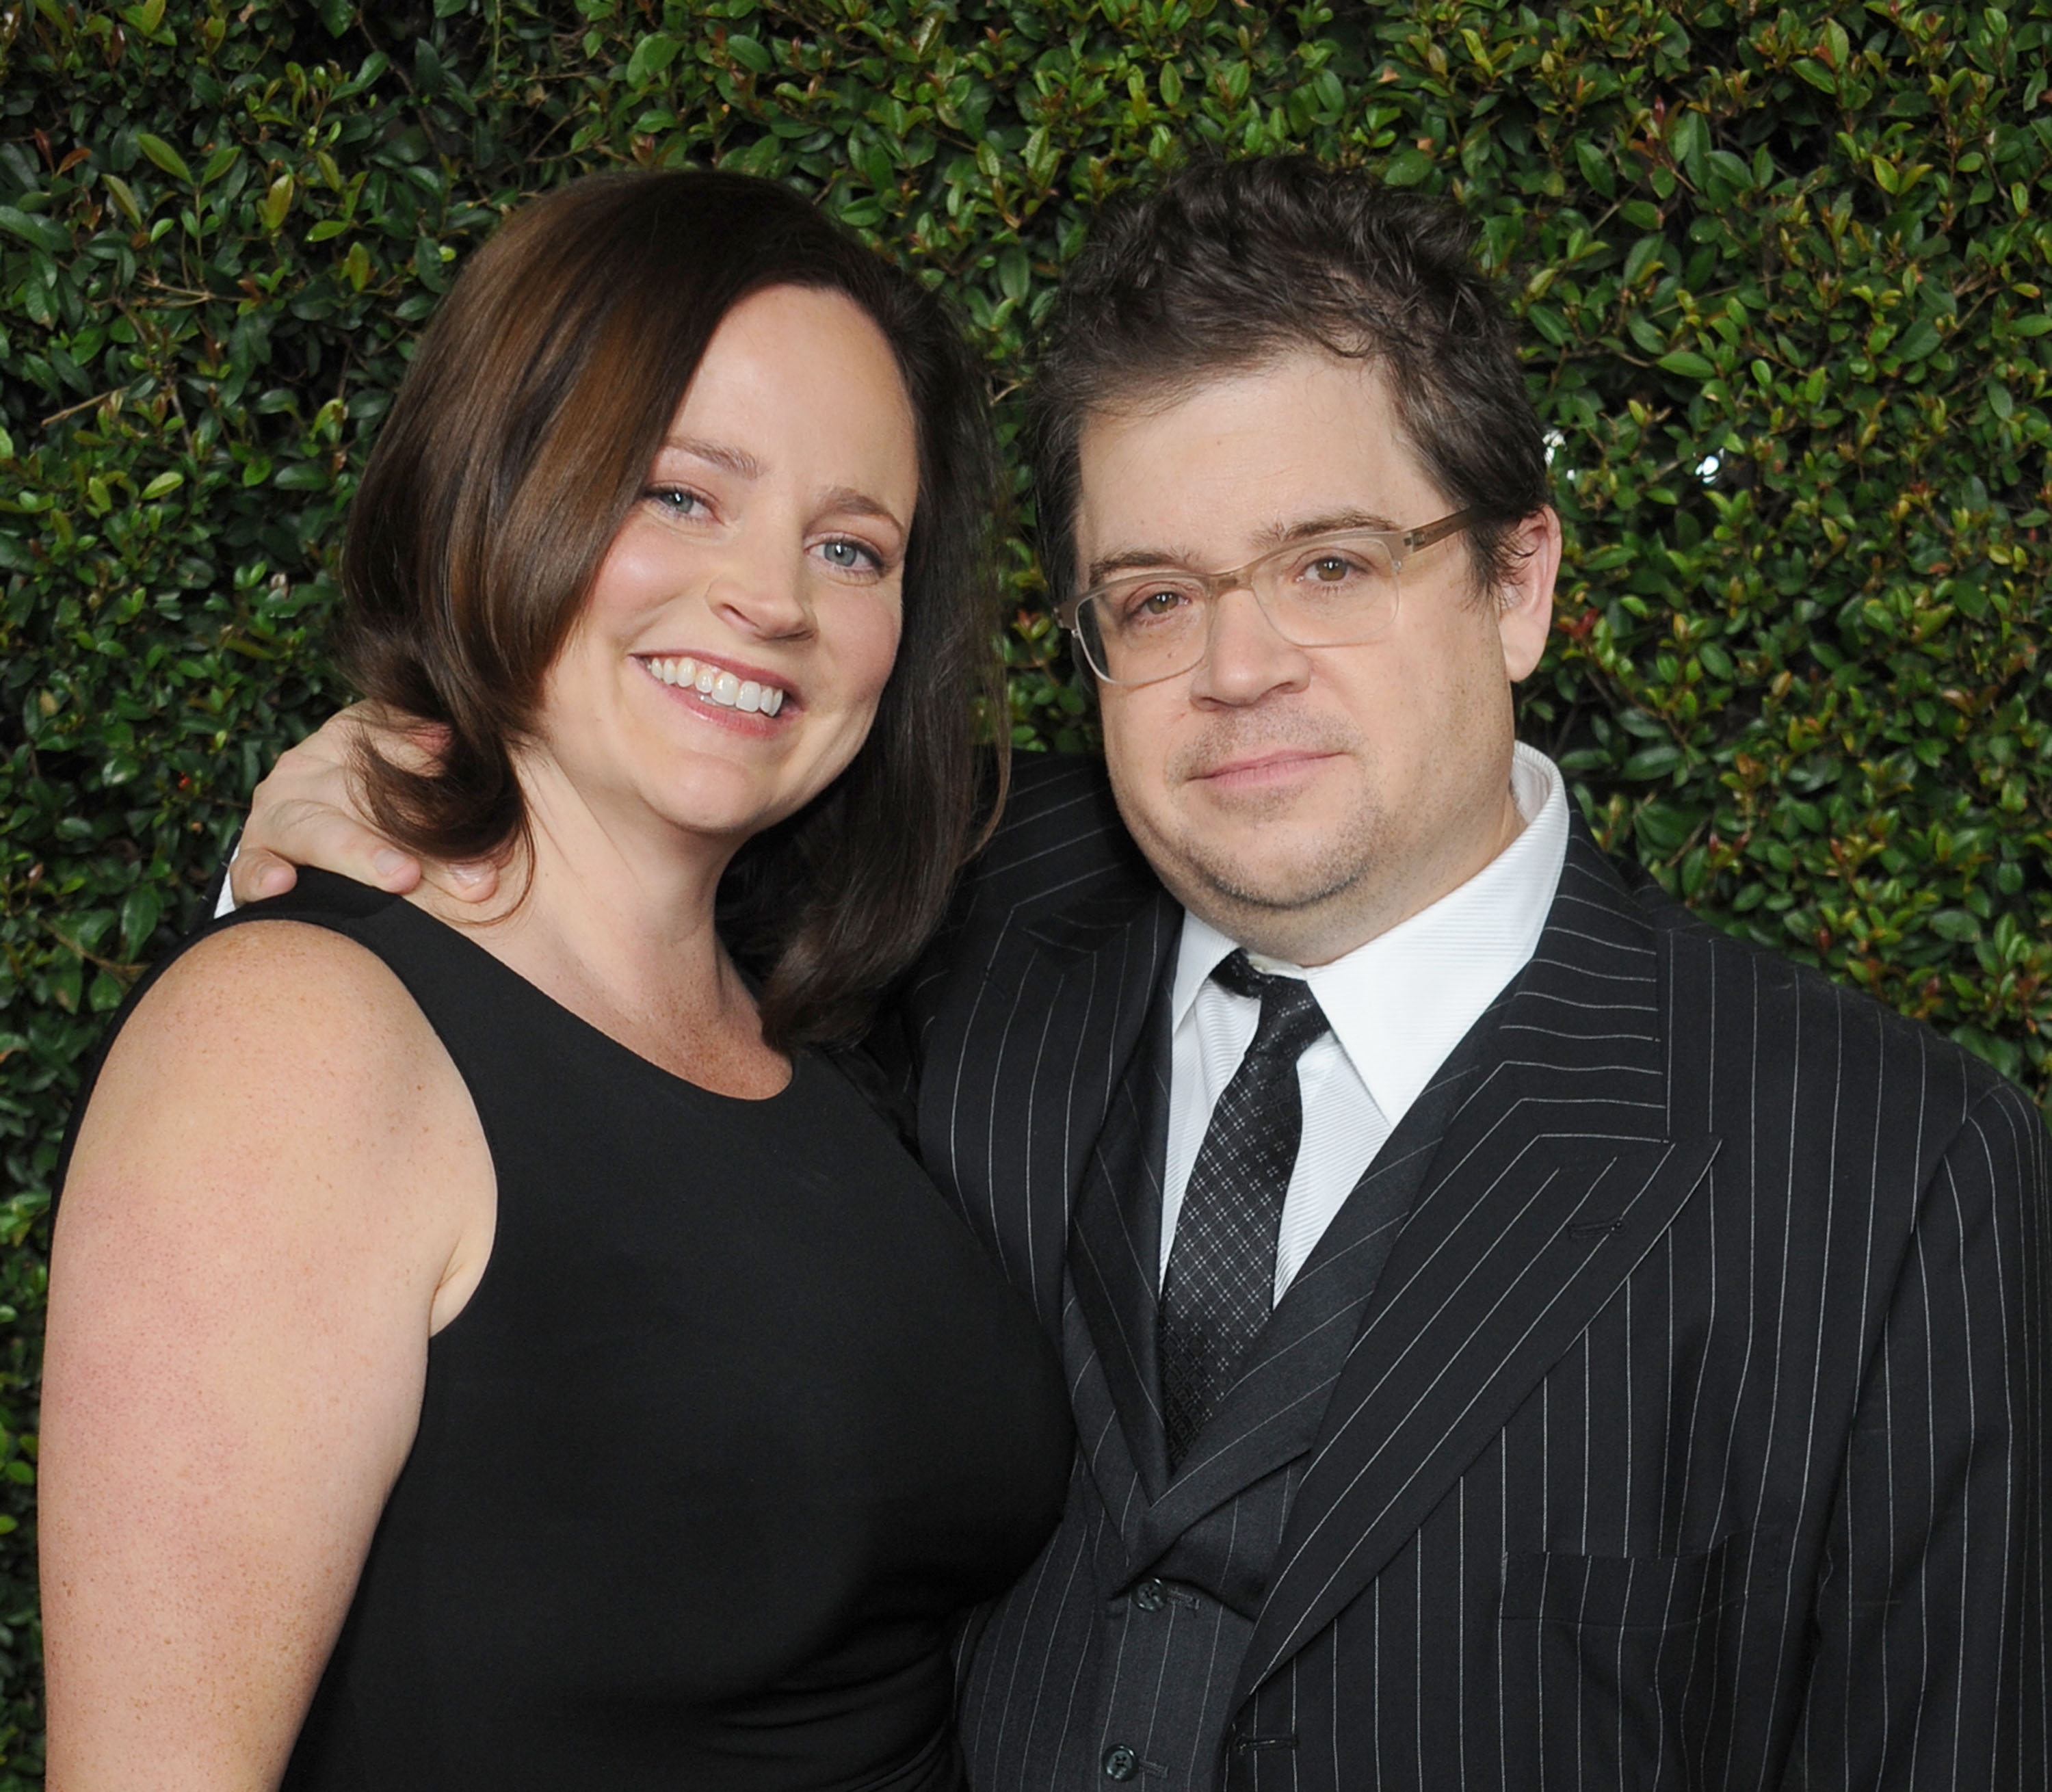 Actor Patton Oswalt and wife Michelle McNamara at the 